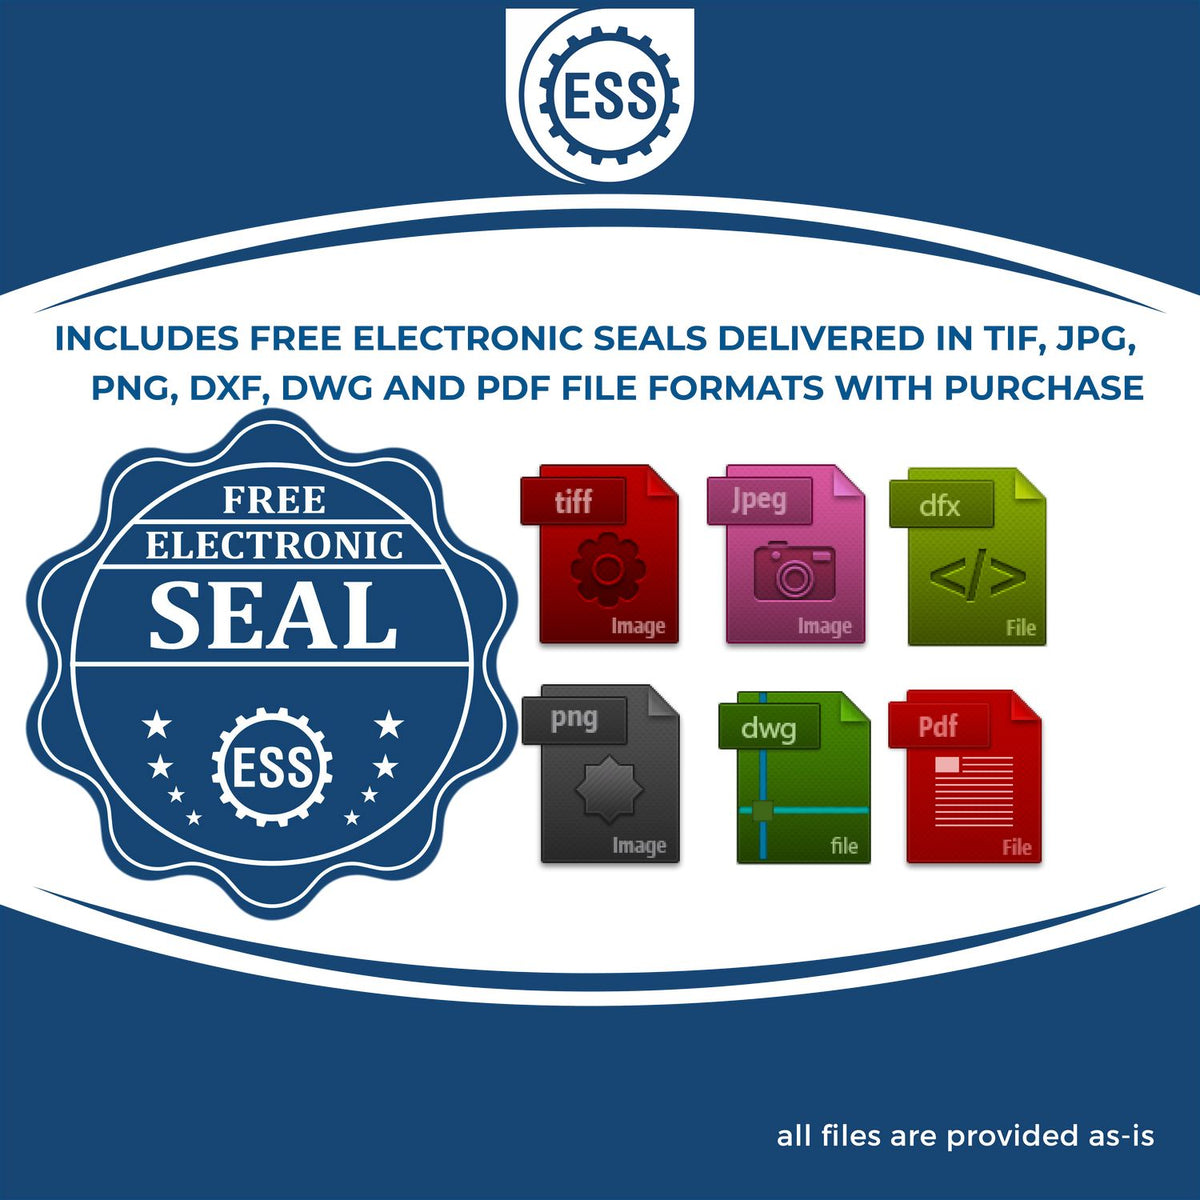 An infographic for the free electronic seal for the Self-Inking Rectangular Guam Notary Stamp illustrating the different file type icons such as DXF, DWG, TIF, JPG and PNG.